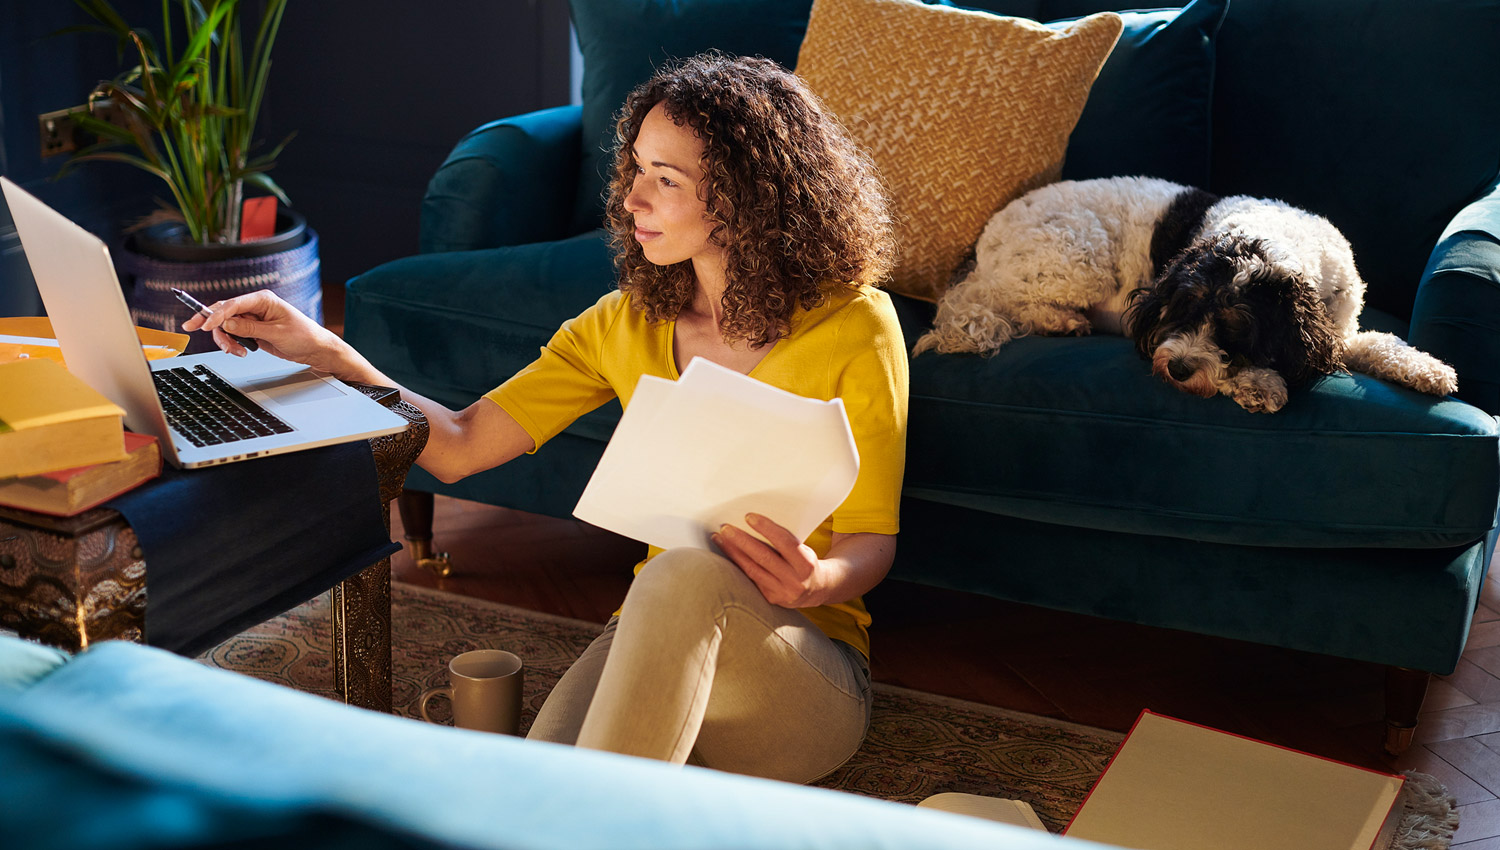 A woman sitting on the floor looks at her open laptop on a coffee table as her dog stretches out on a couch. Follow the steps in this article to avoid an audit.